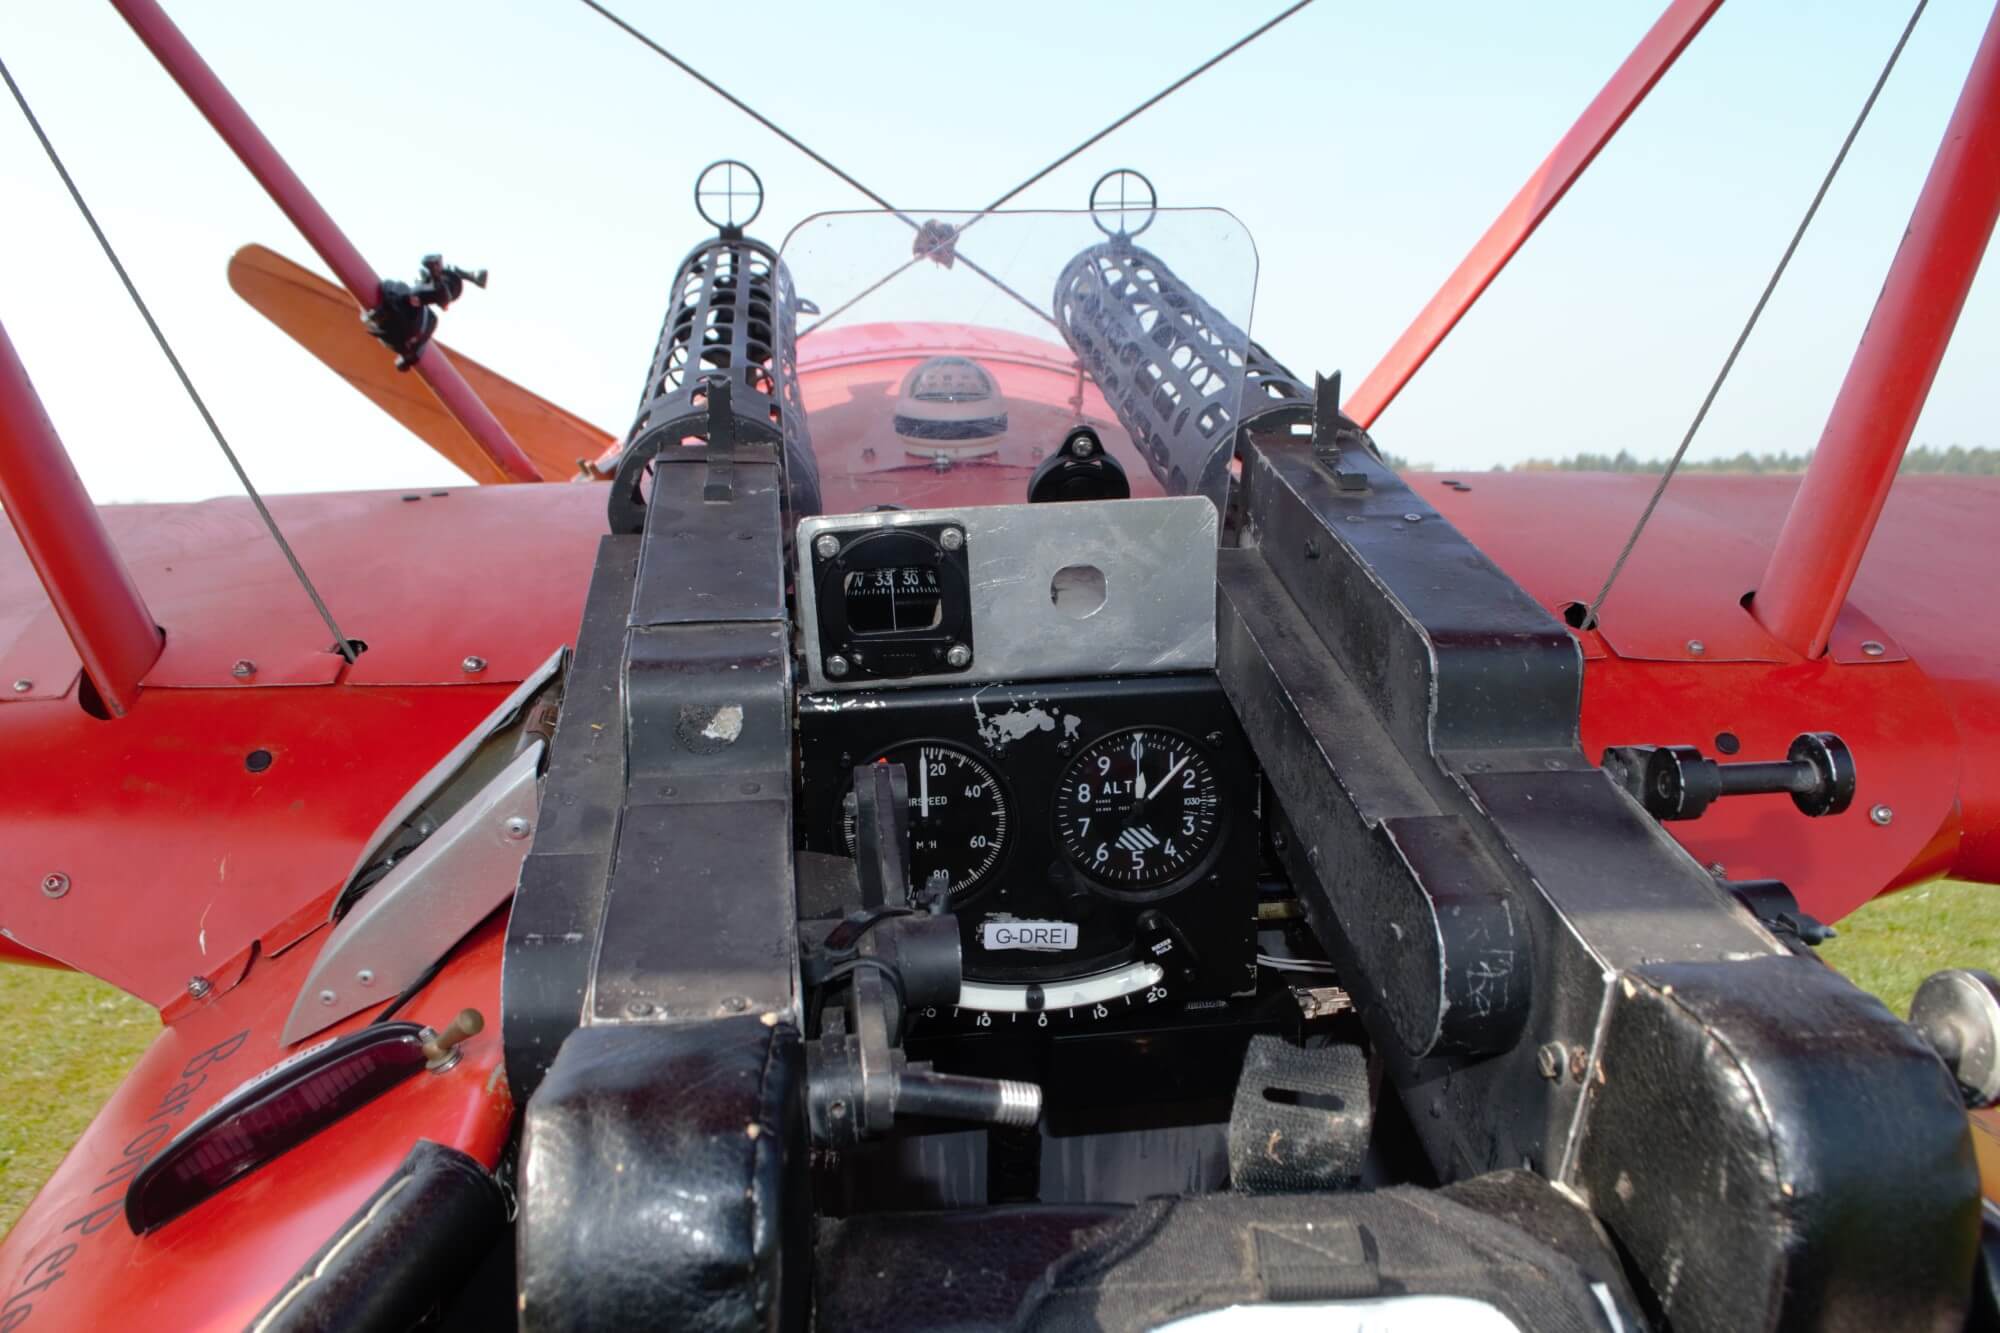 View from the replica Fokker triplane seat